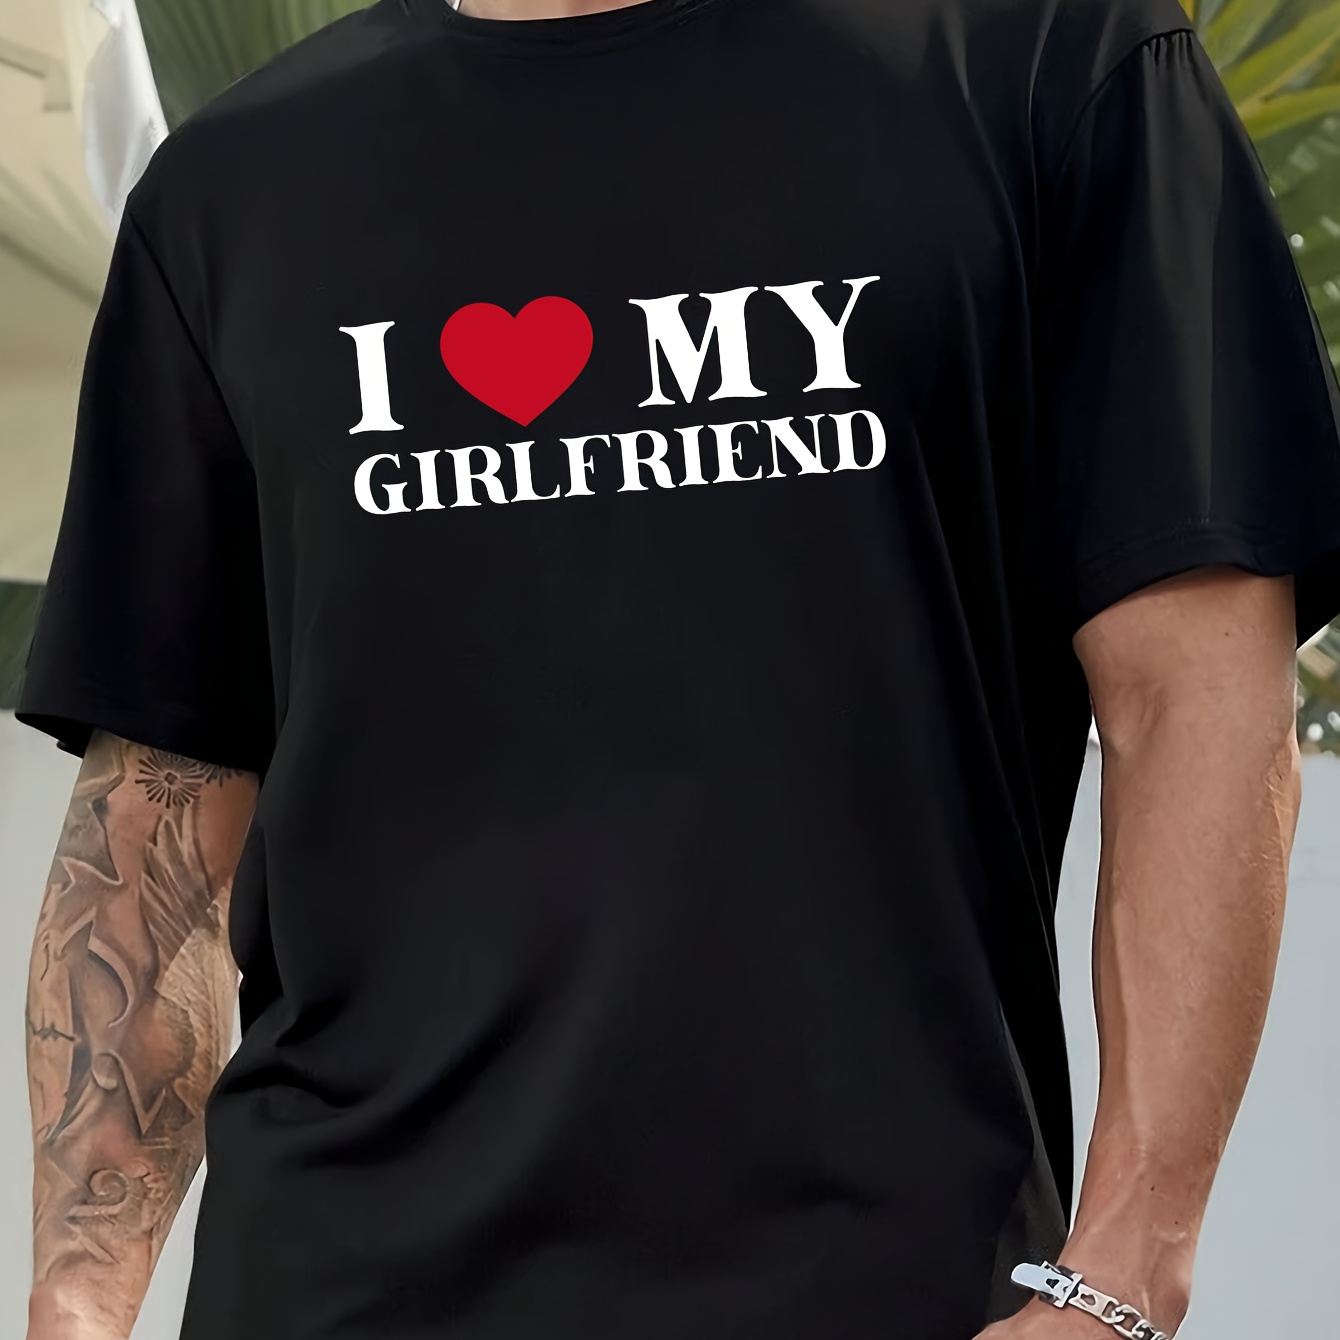 

I Love My Girlfriend Print Men's Round Neck Short Sleeve Tee Fashion Regular Fit T-shirt Top For Spring Summer Holiday